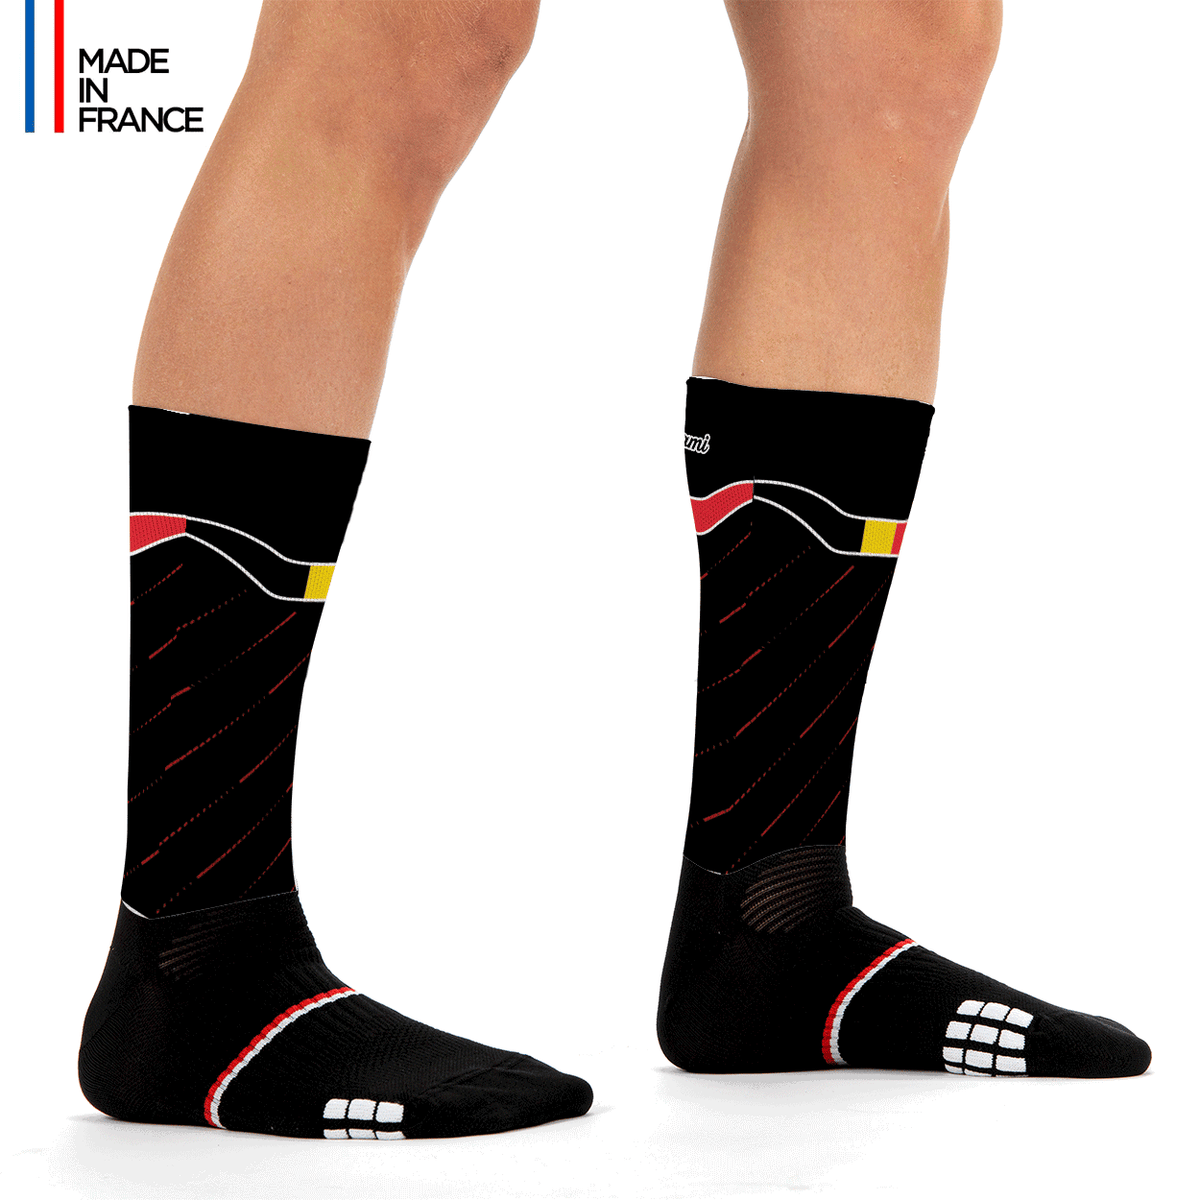 Belgium running cycling socks- chaussettes vélo course à pied Belgique Kiwami Sports made in france